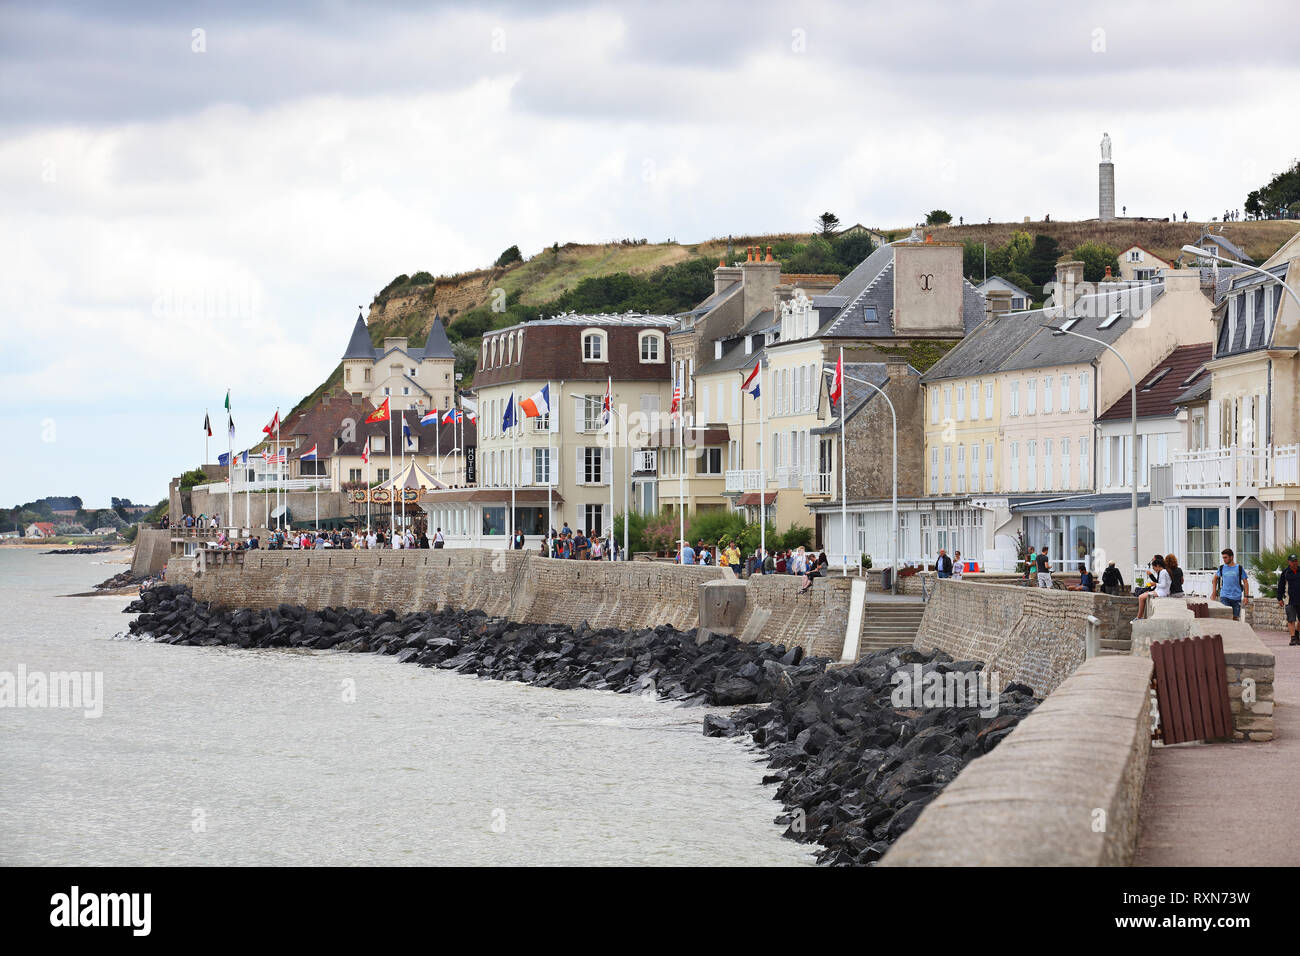 Walking path on the water's edge in the tourist town of Arromanches-les-Bains which played an important role during the D-Day landing in WWII, Normandy, France Stock Photo